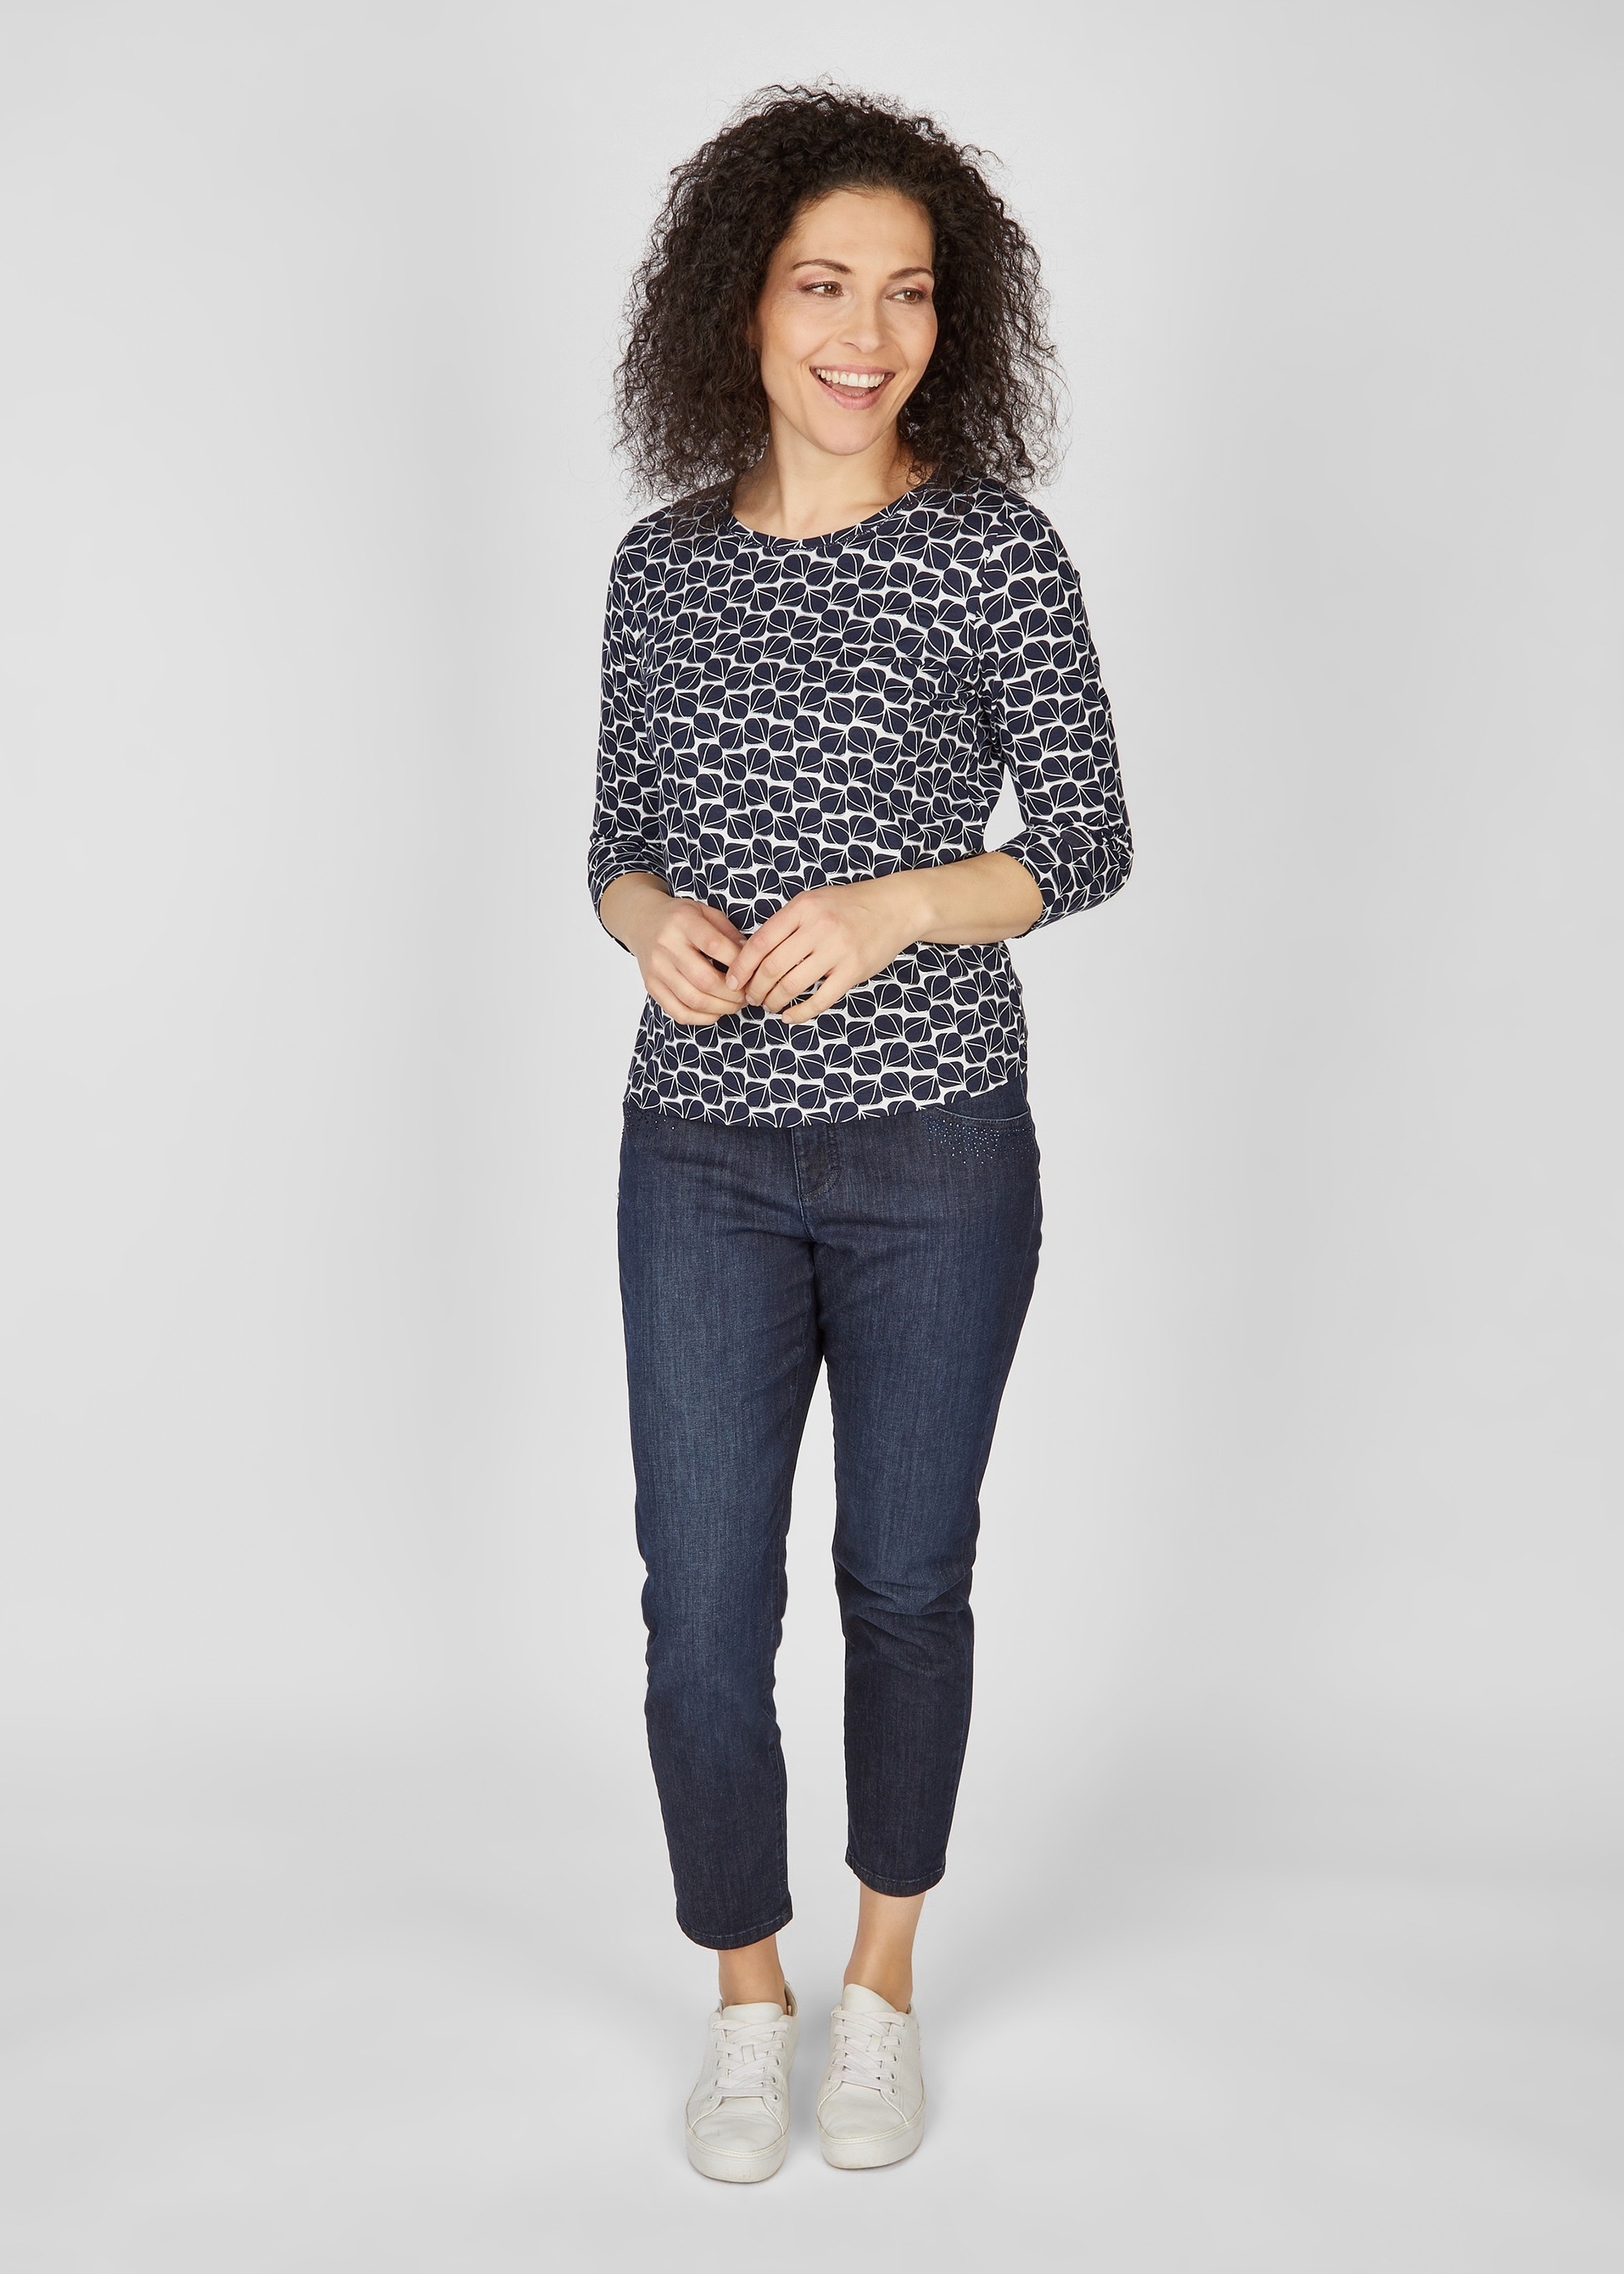 Rabe 3/4-Arm-Shirt, mit Allover-Muster ♕ bei